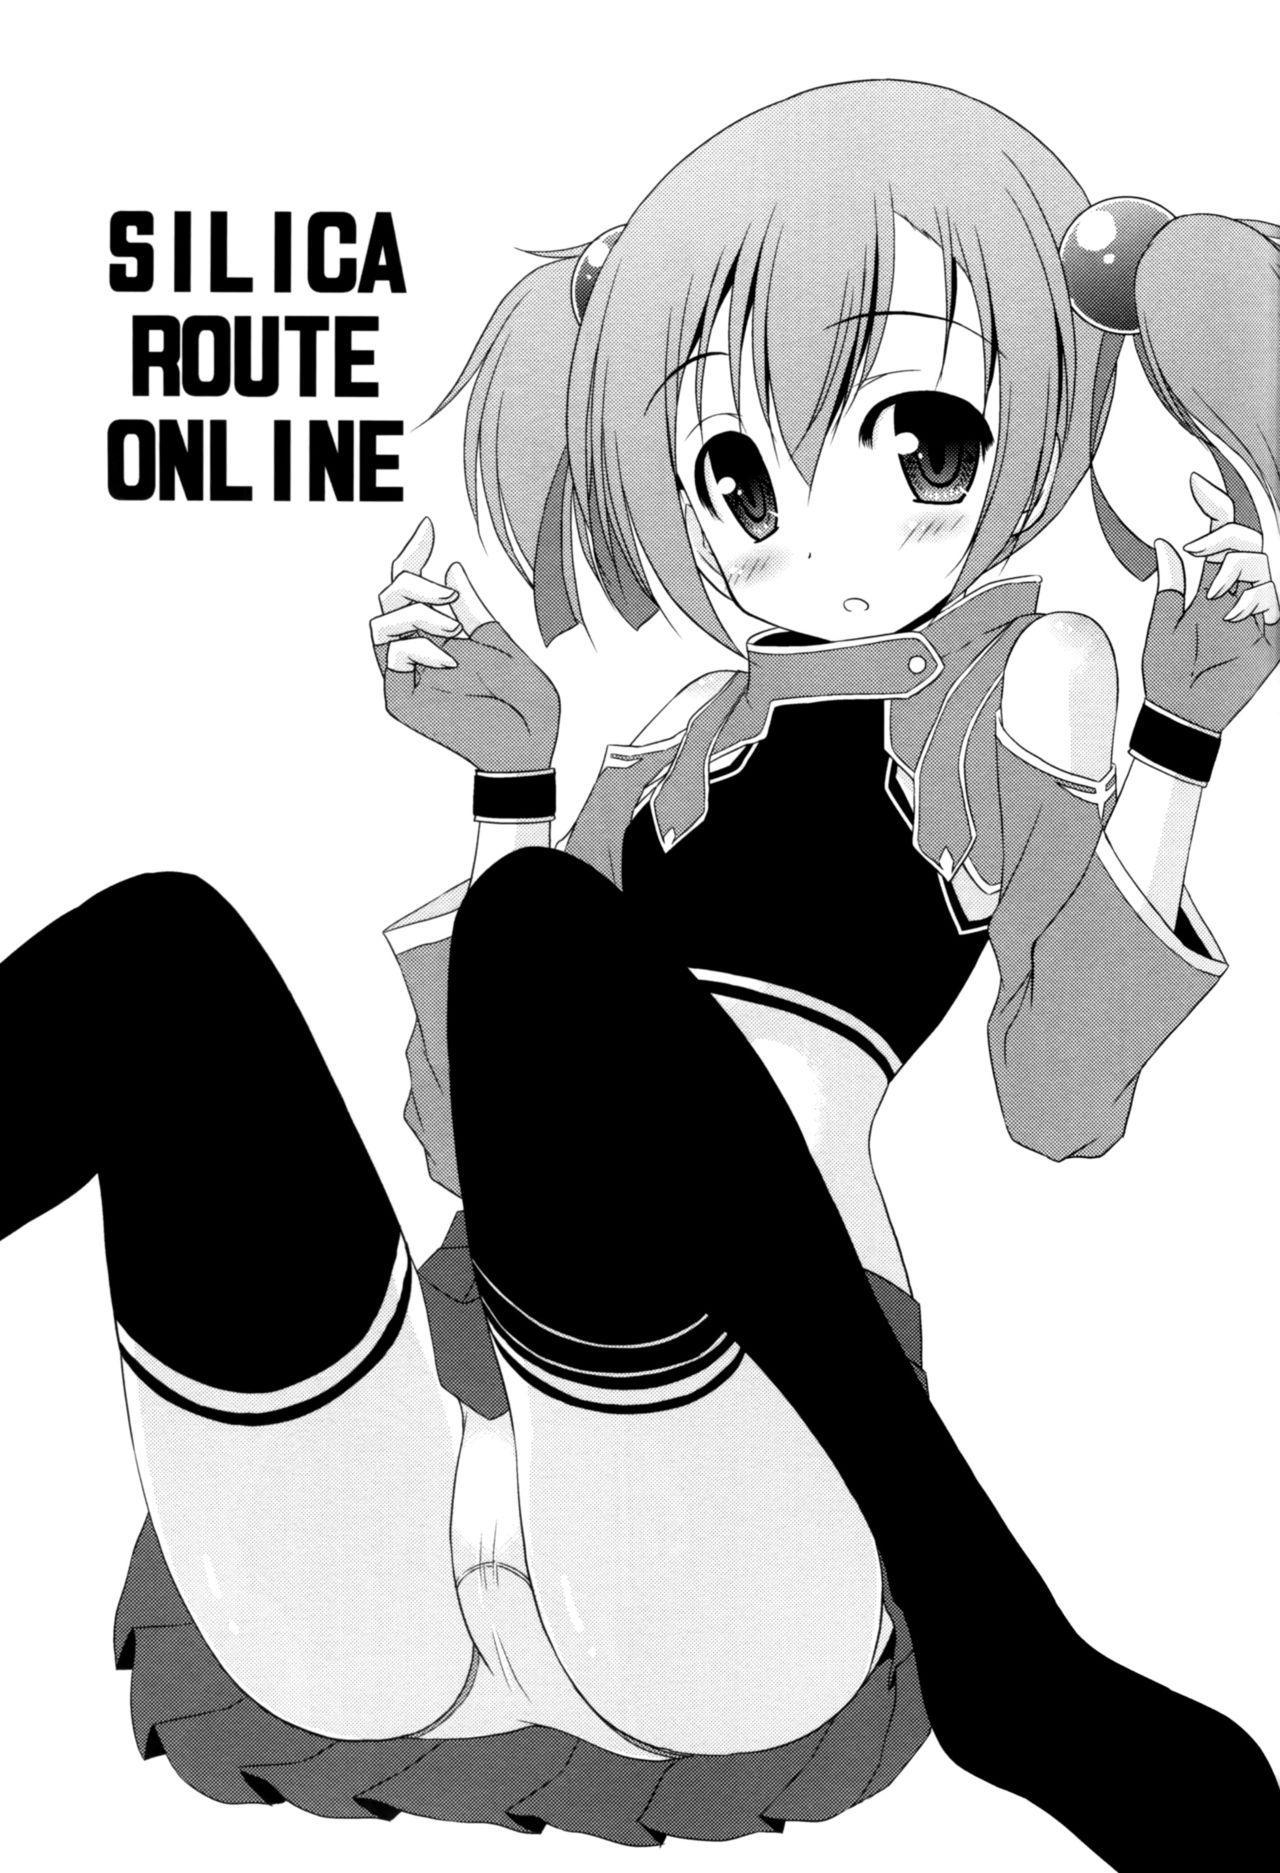 Transex Silica Route Online - Sword art online Audition - Page 2